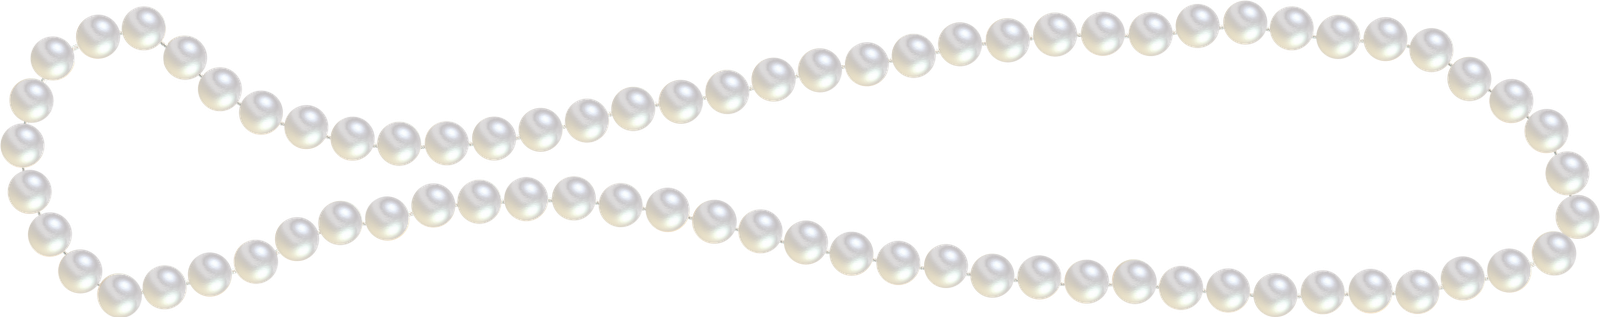 Pearls PNG Free File Download